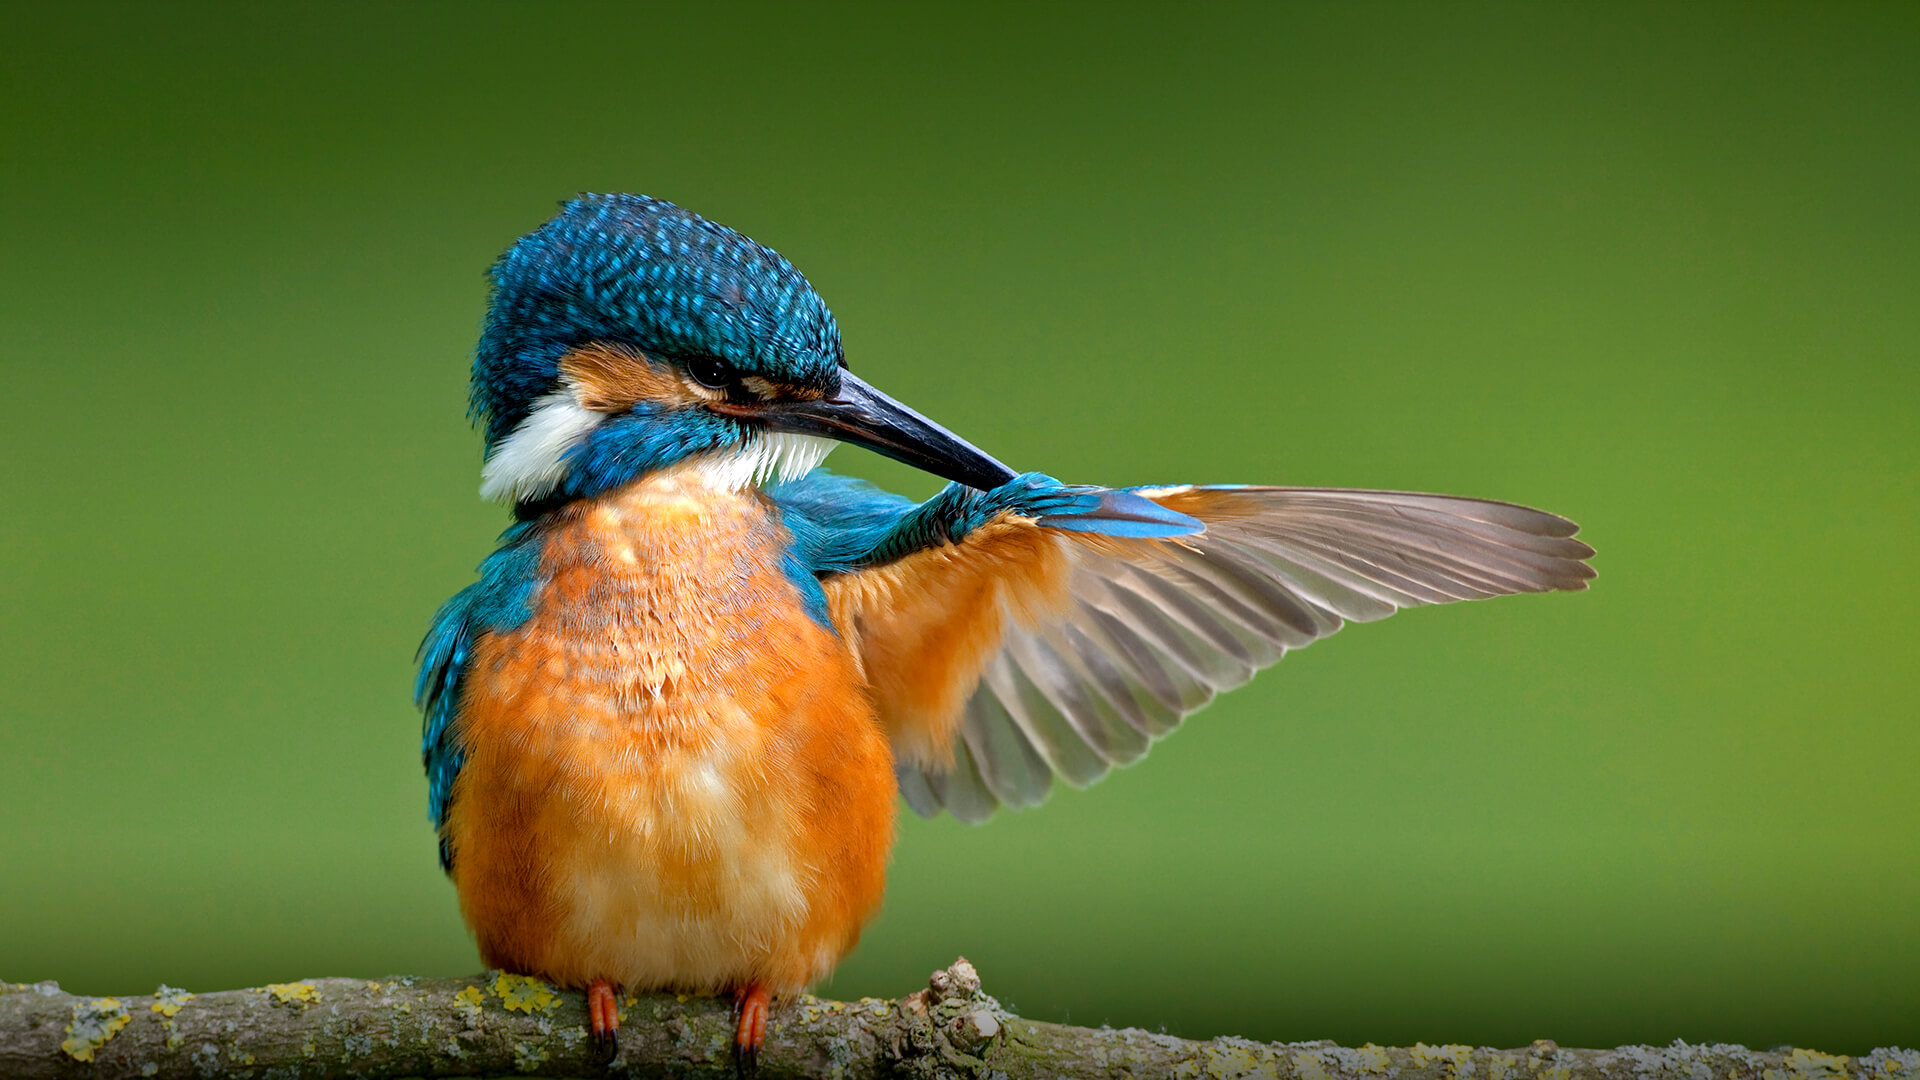 Kingfisher, San Diego Zoo resident, Colorful feathered friend, Conservation efforts, 1920x1080 Full HD Desktop